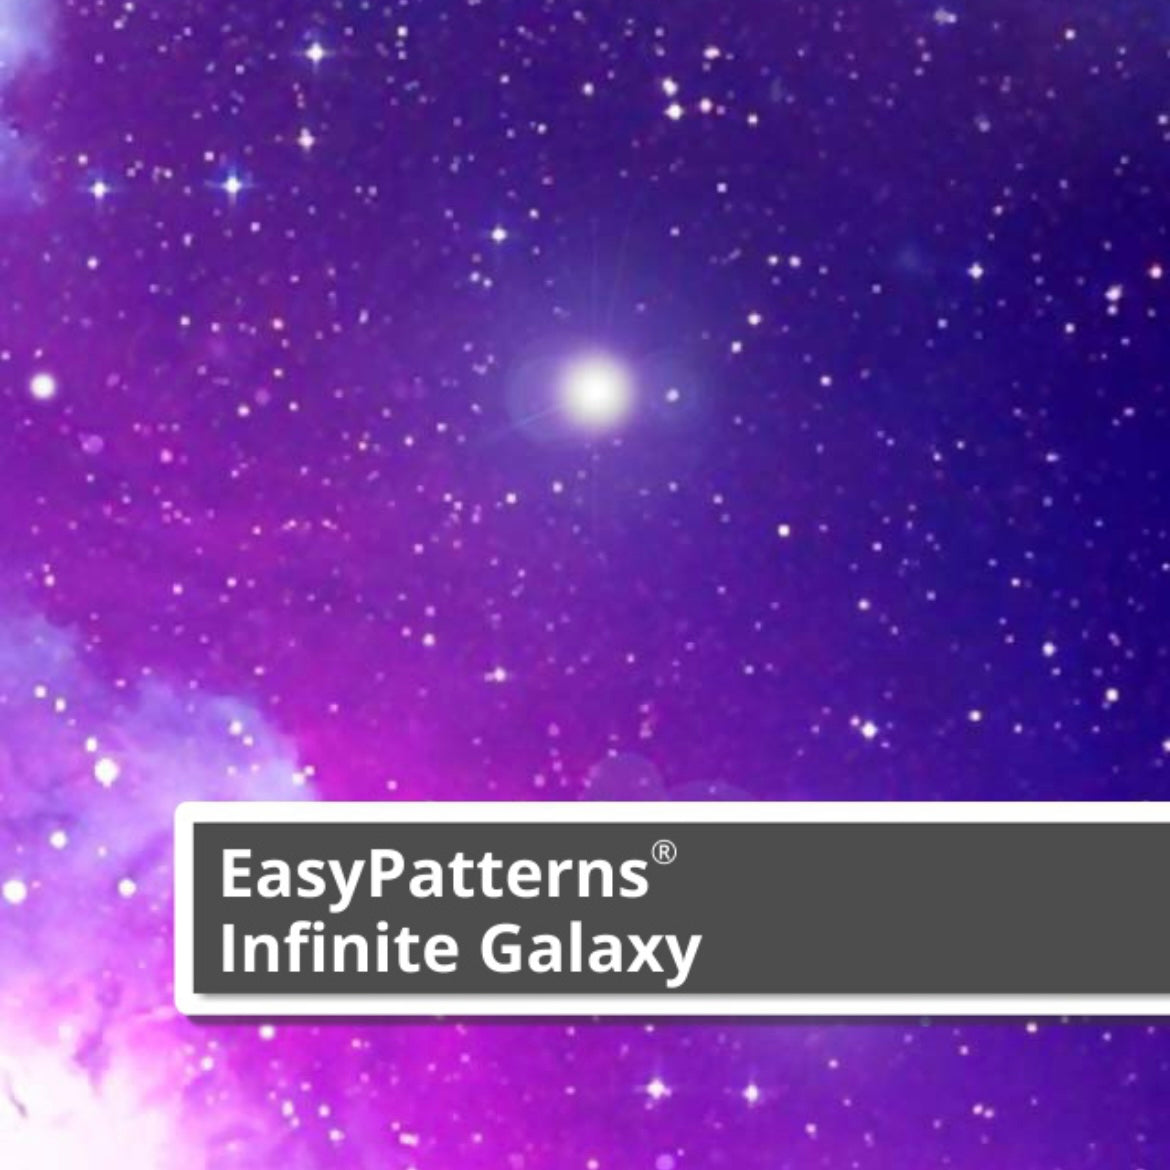 The EasyPatterns HTV Collection